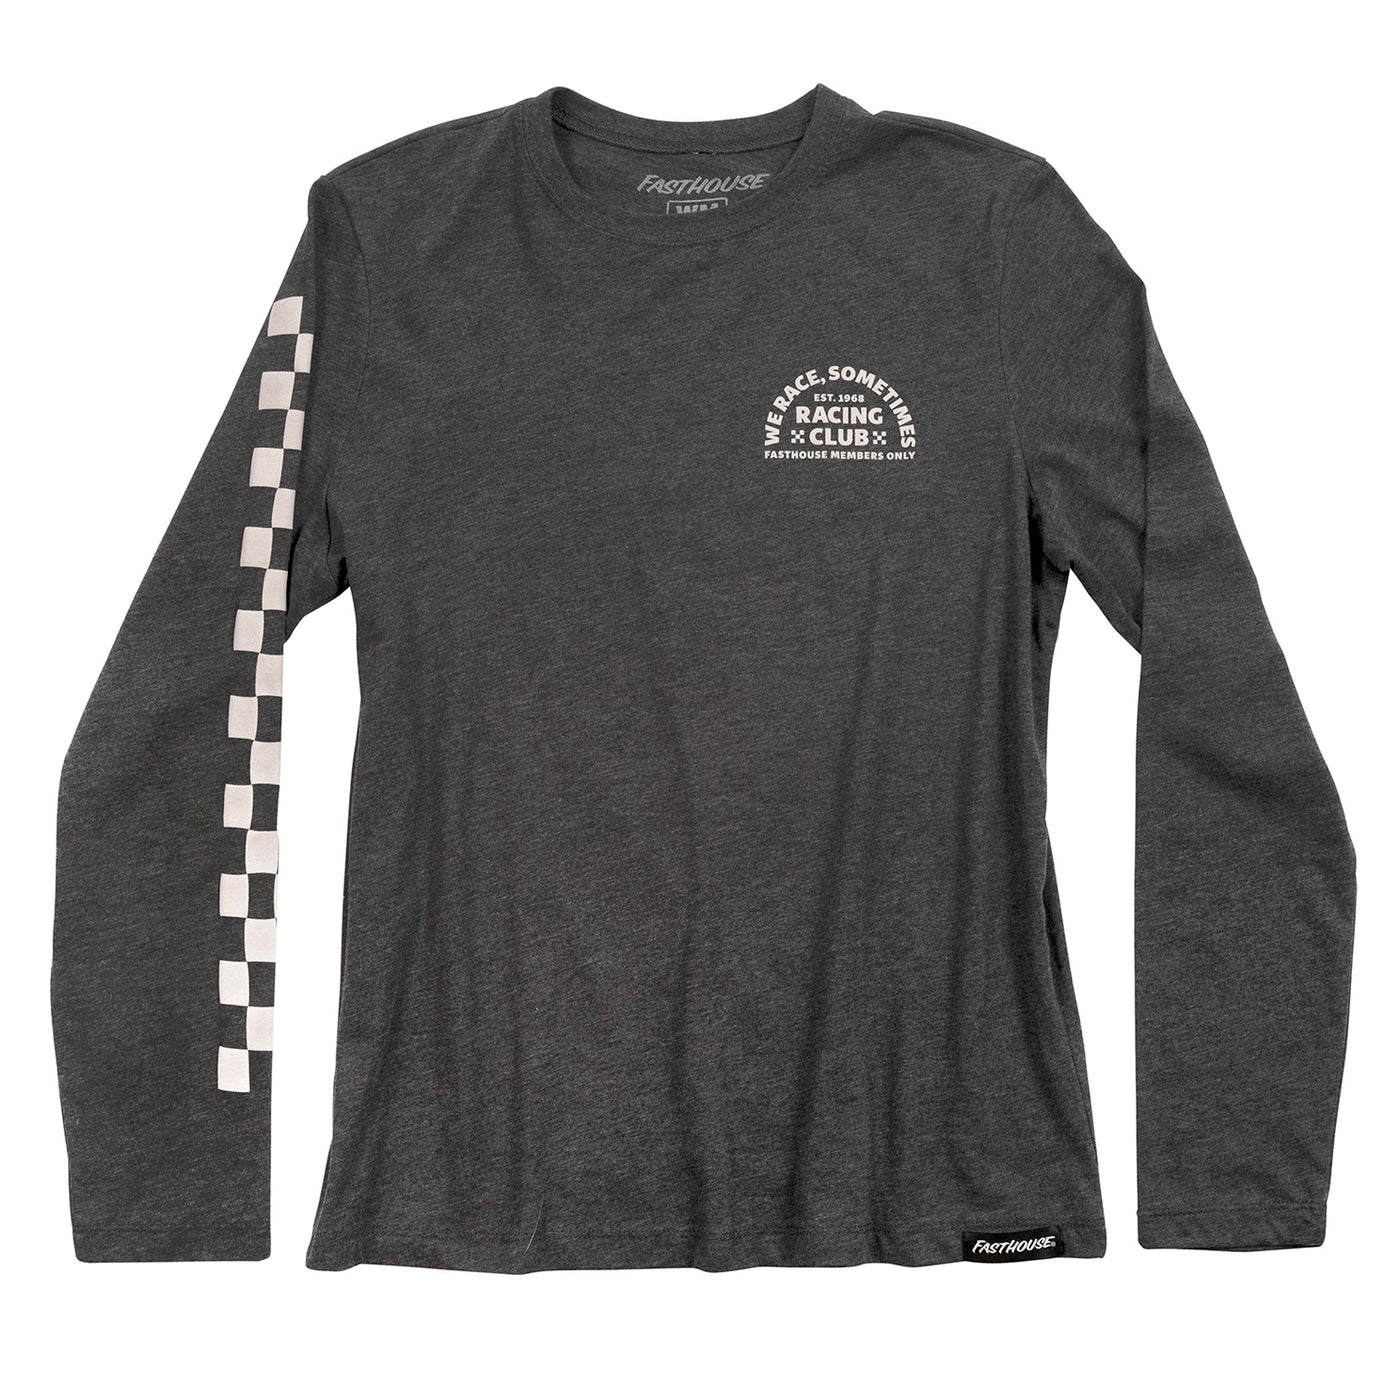 Fasthouse Women's Members Only Long Sleeve Tee